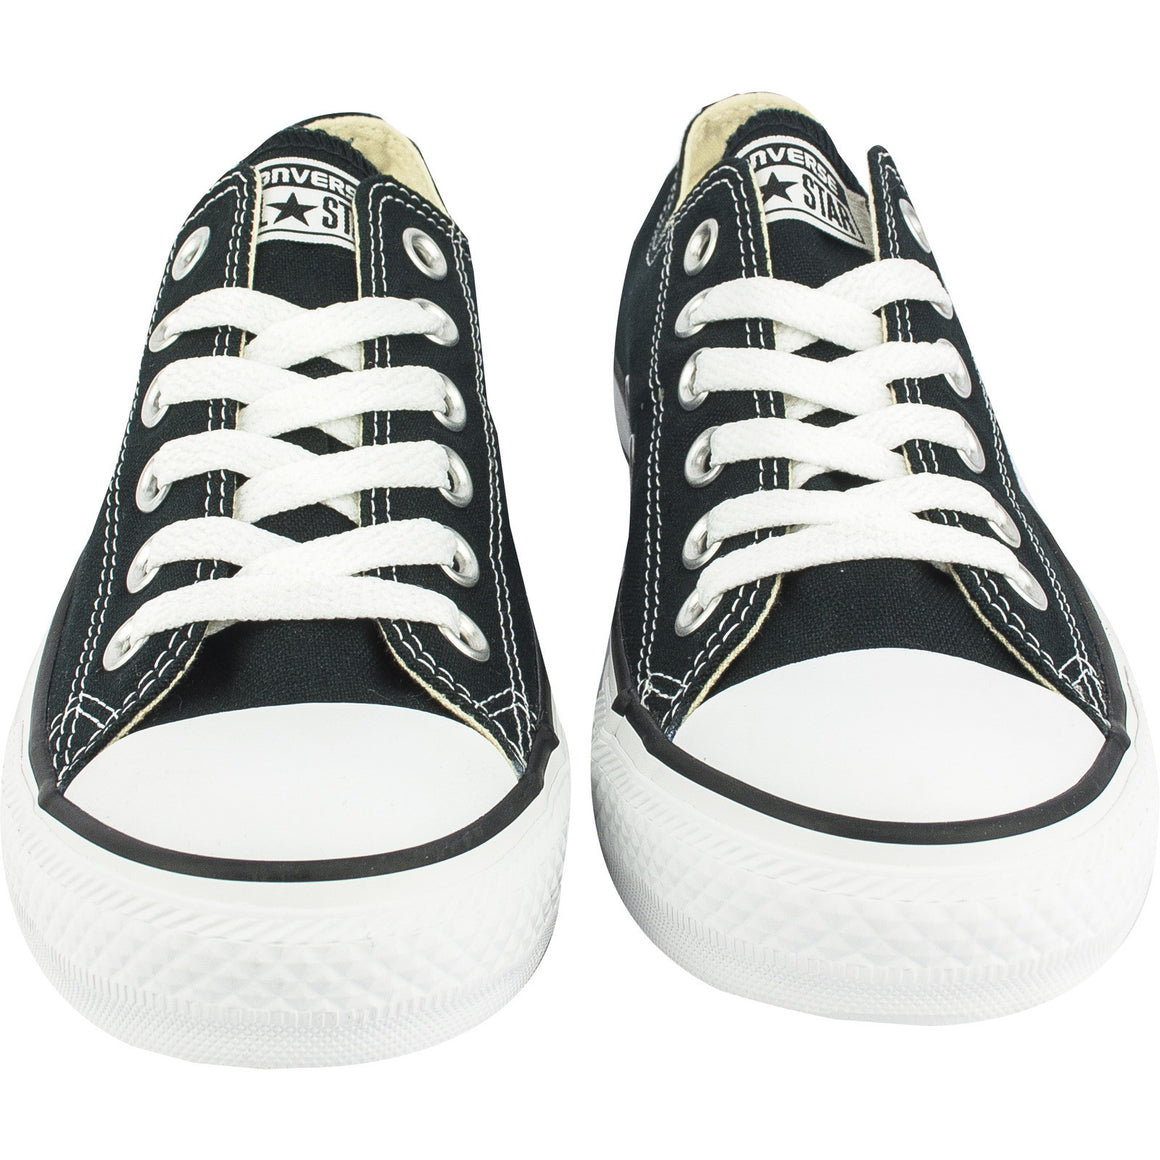 converse all star low tops white